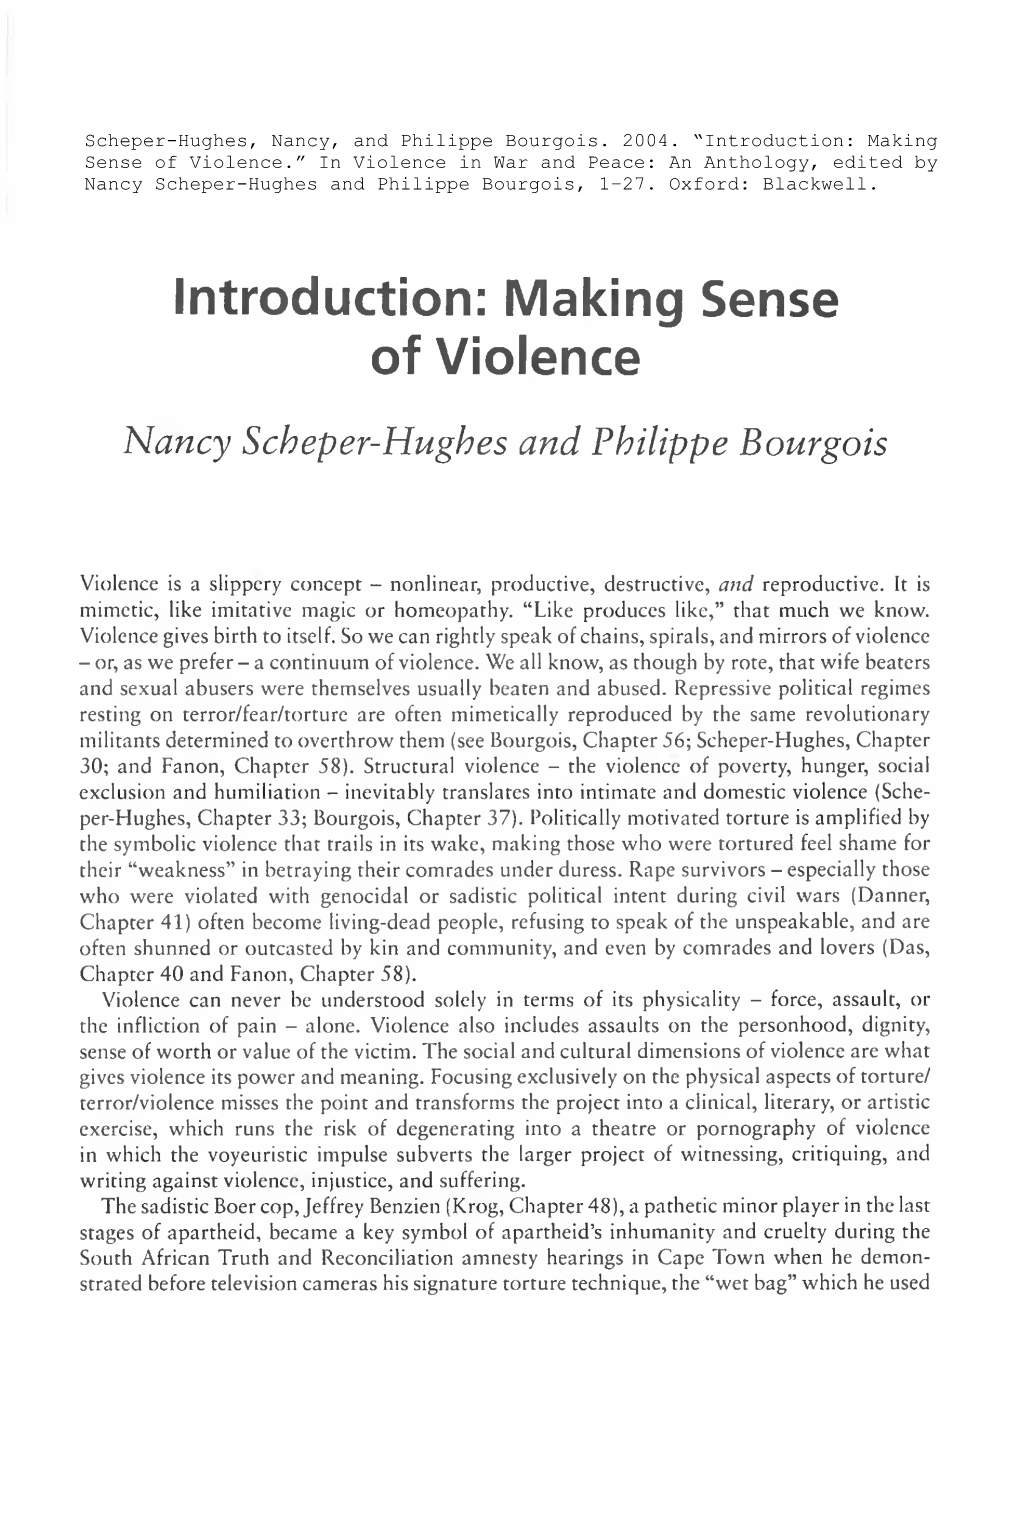 Introduction: Making Sense of Violence Nancy Scheper-Hughes and Philippe Bourgois